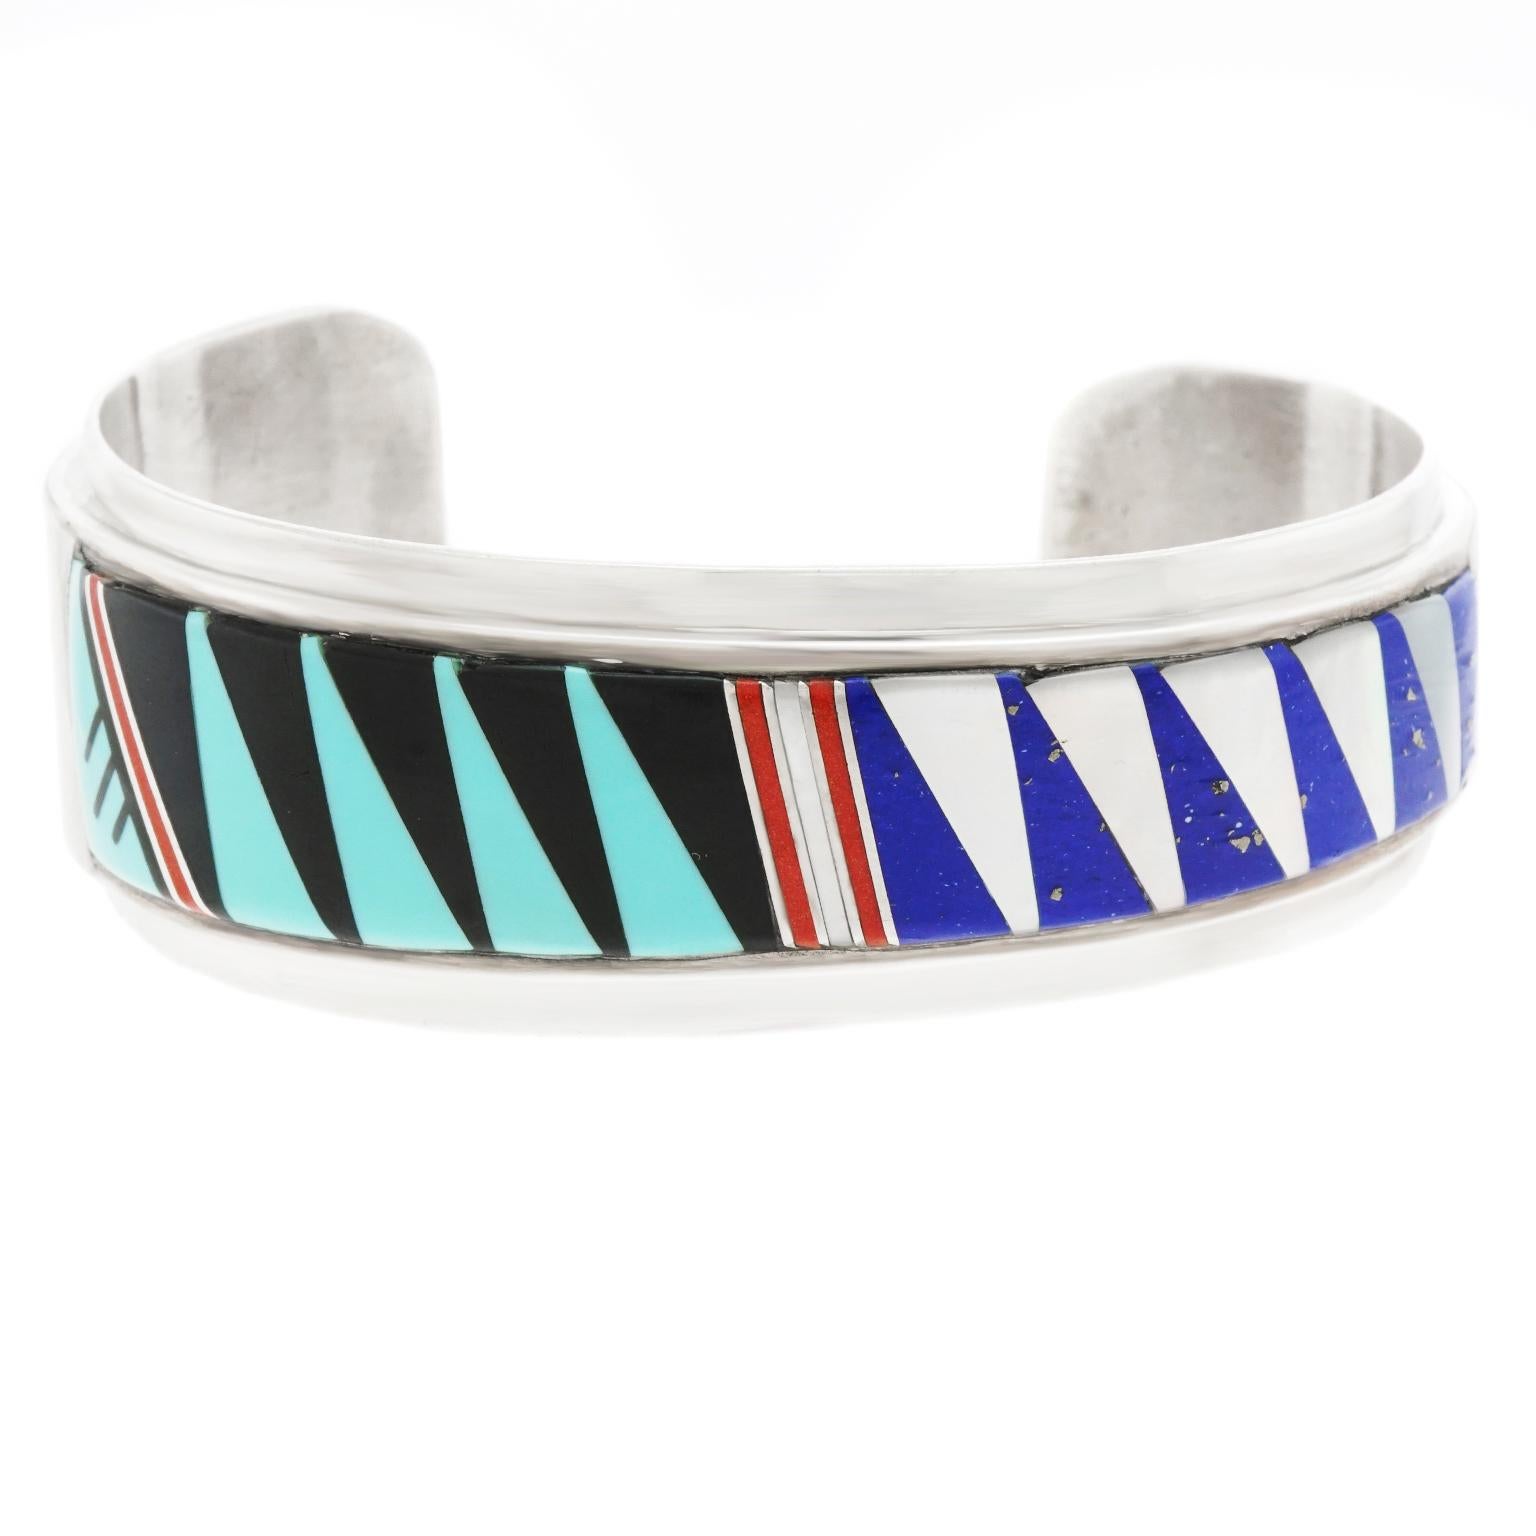 Cabochon Yazzie Family Inlaid Stone Sterling Cuff Bracelet Navajo